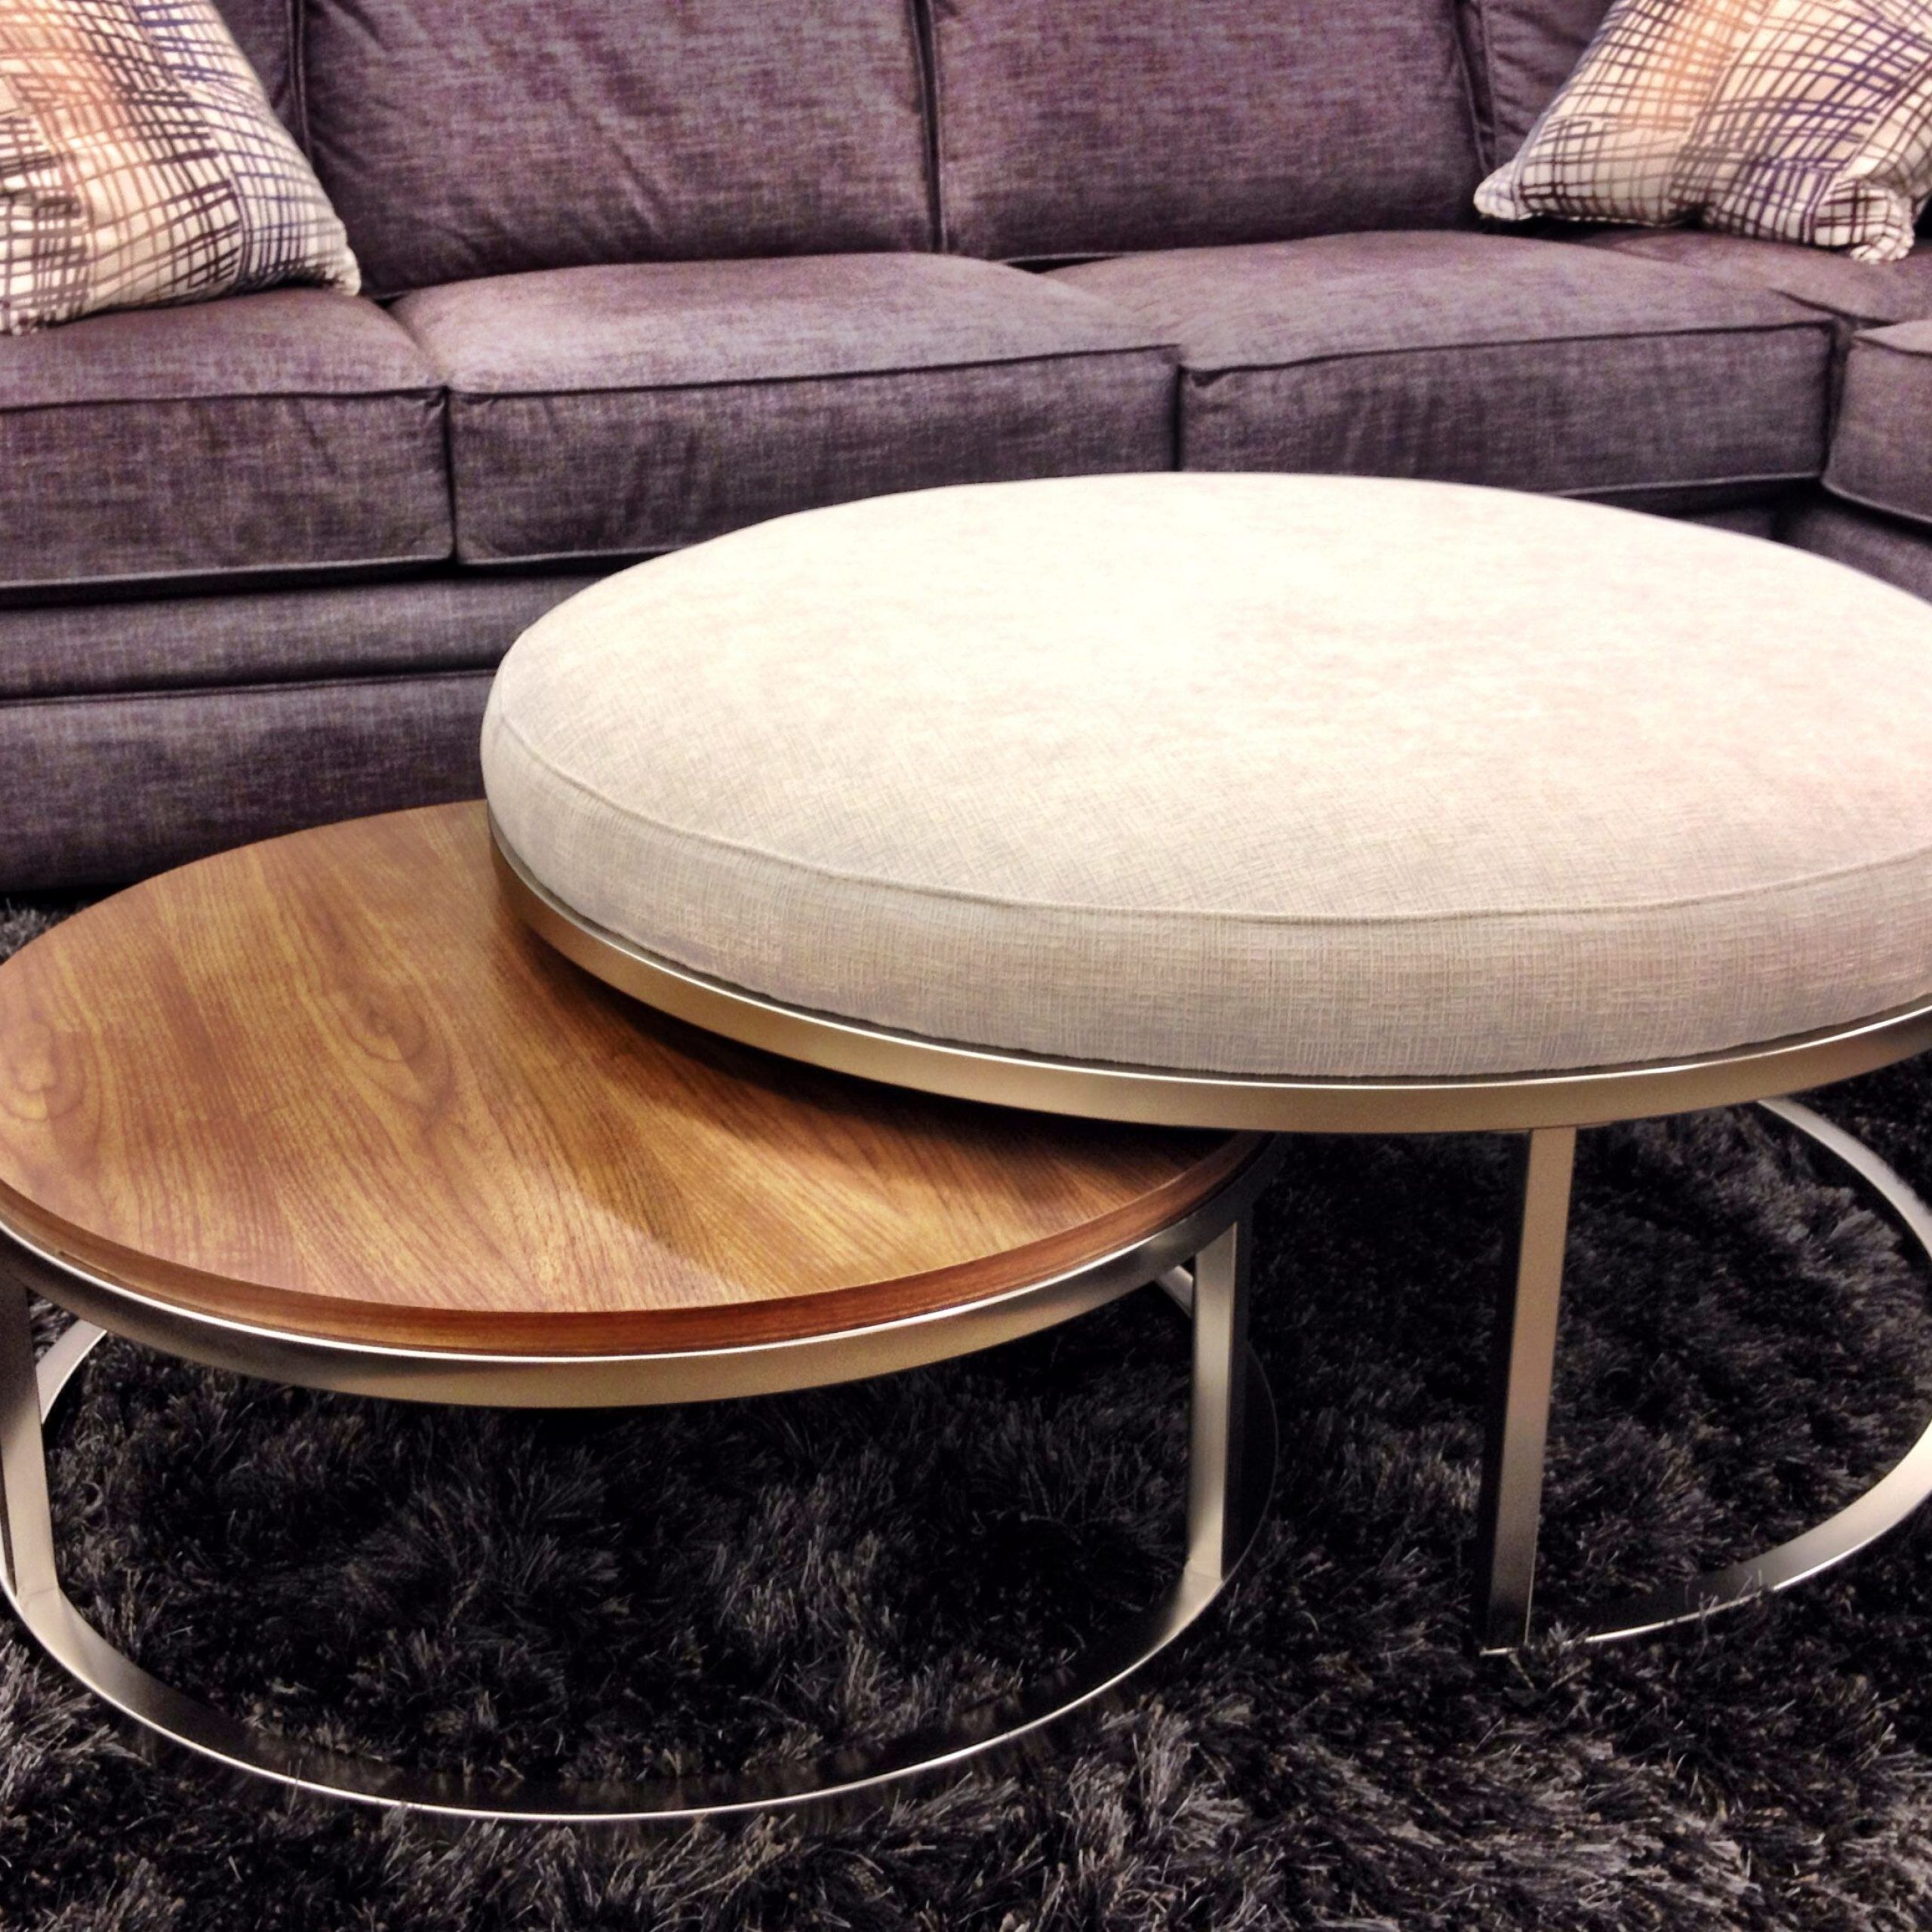 The Best Of Both Worlds Set Of 2 Nesting Coffee Table & Ottoman (View 9 of 15)